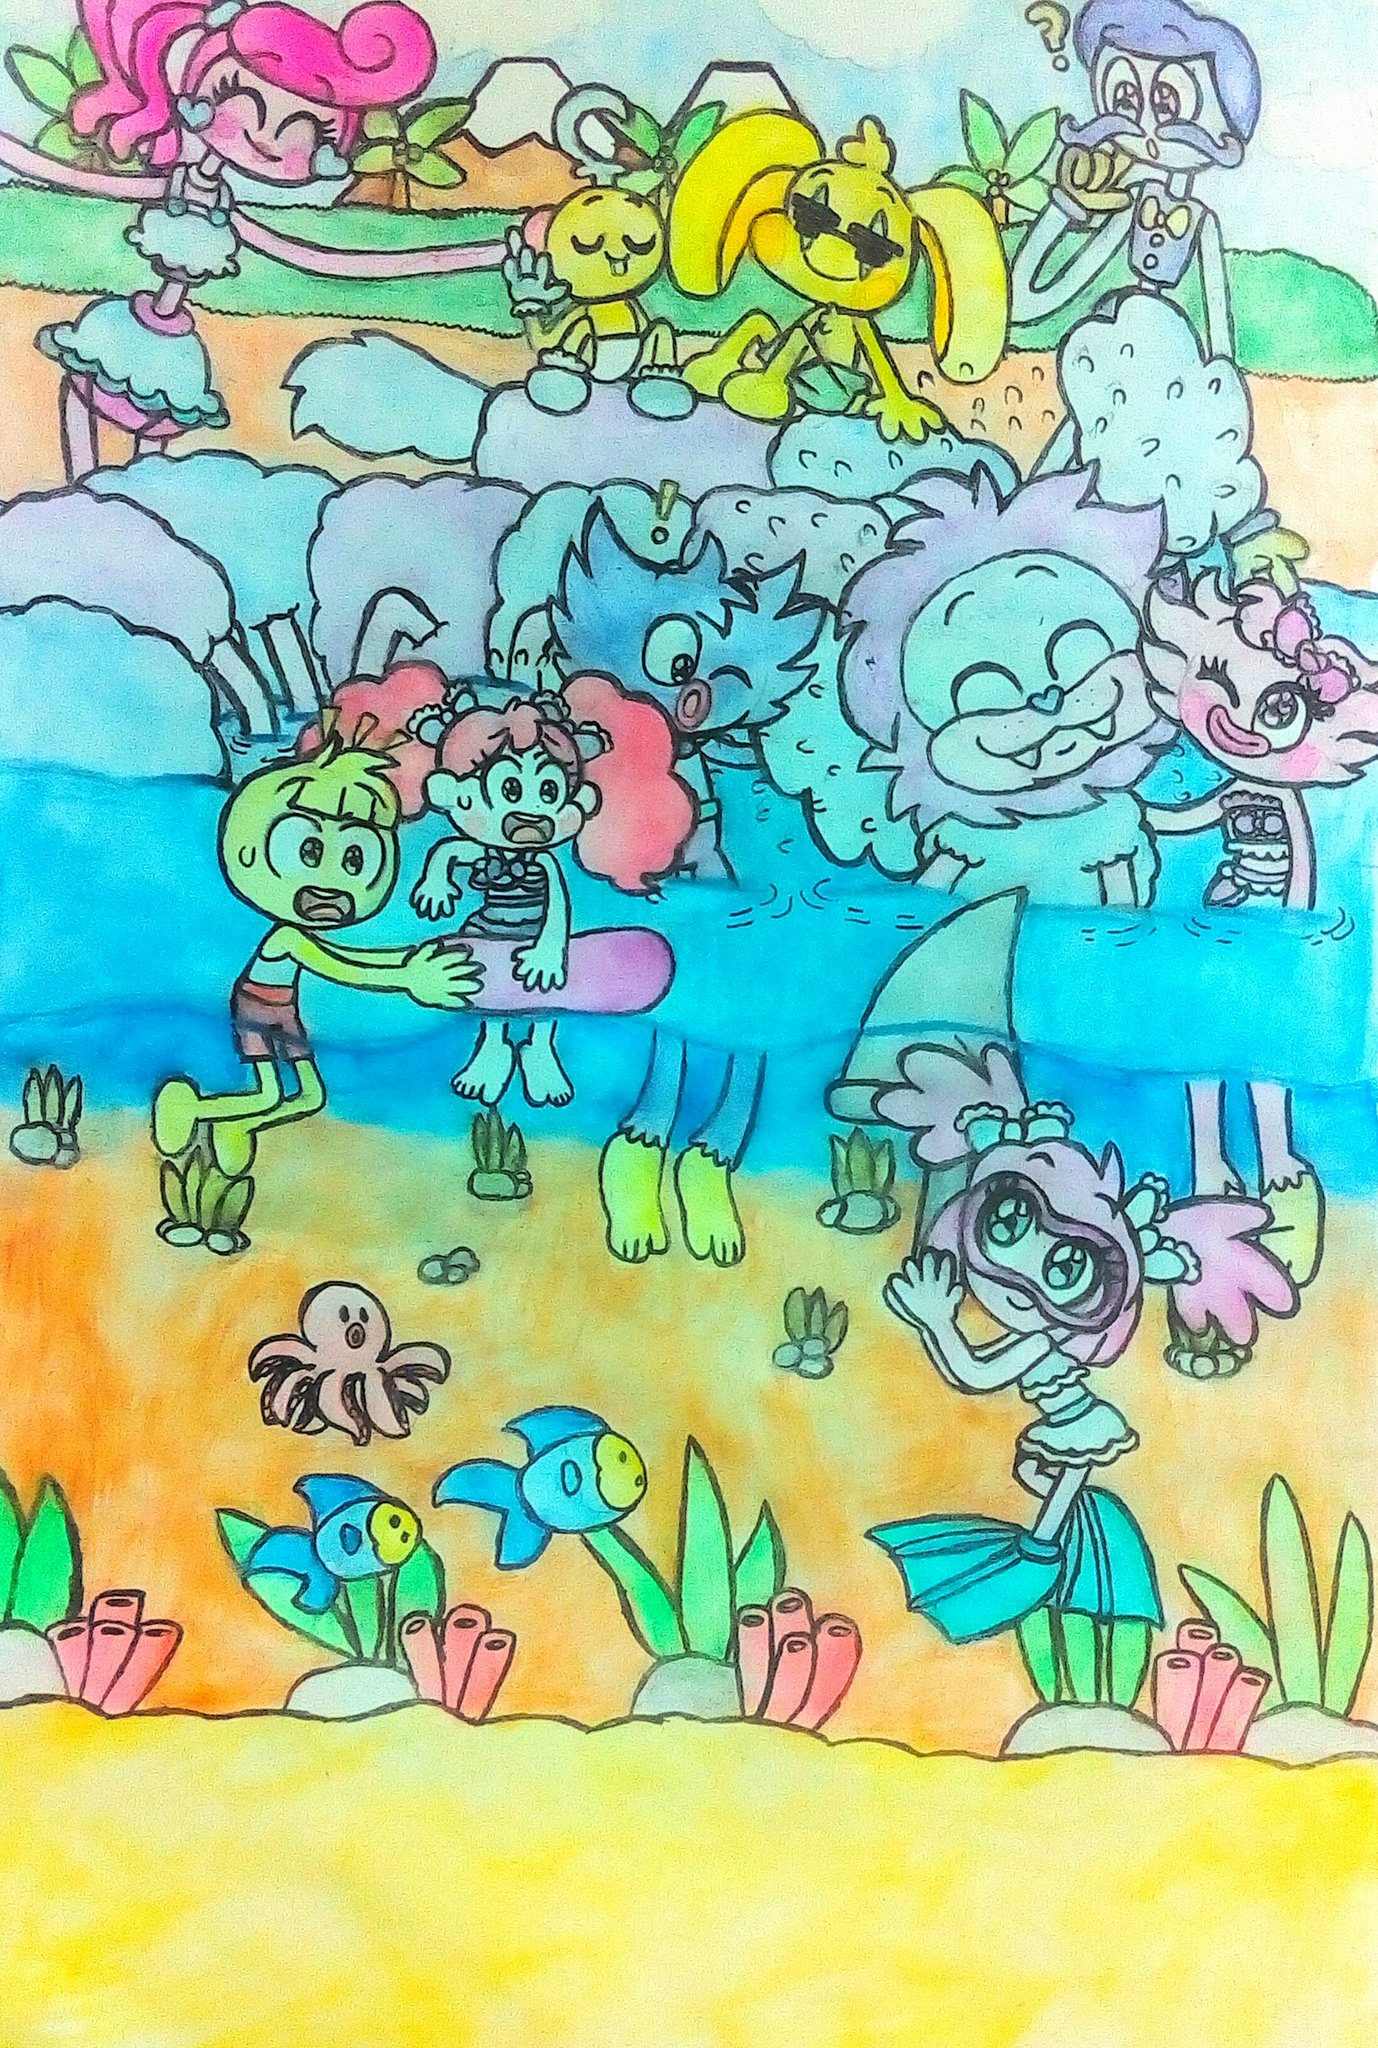 Playtime co. by cfburton47 on Sketchers United